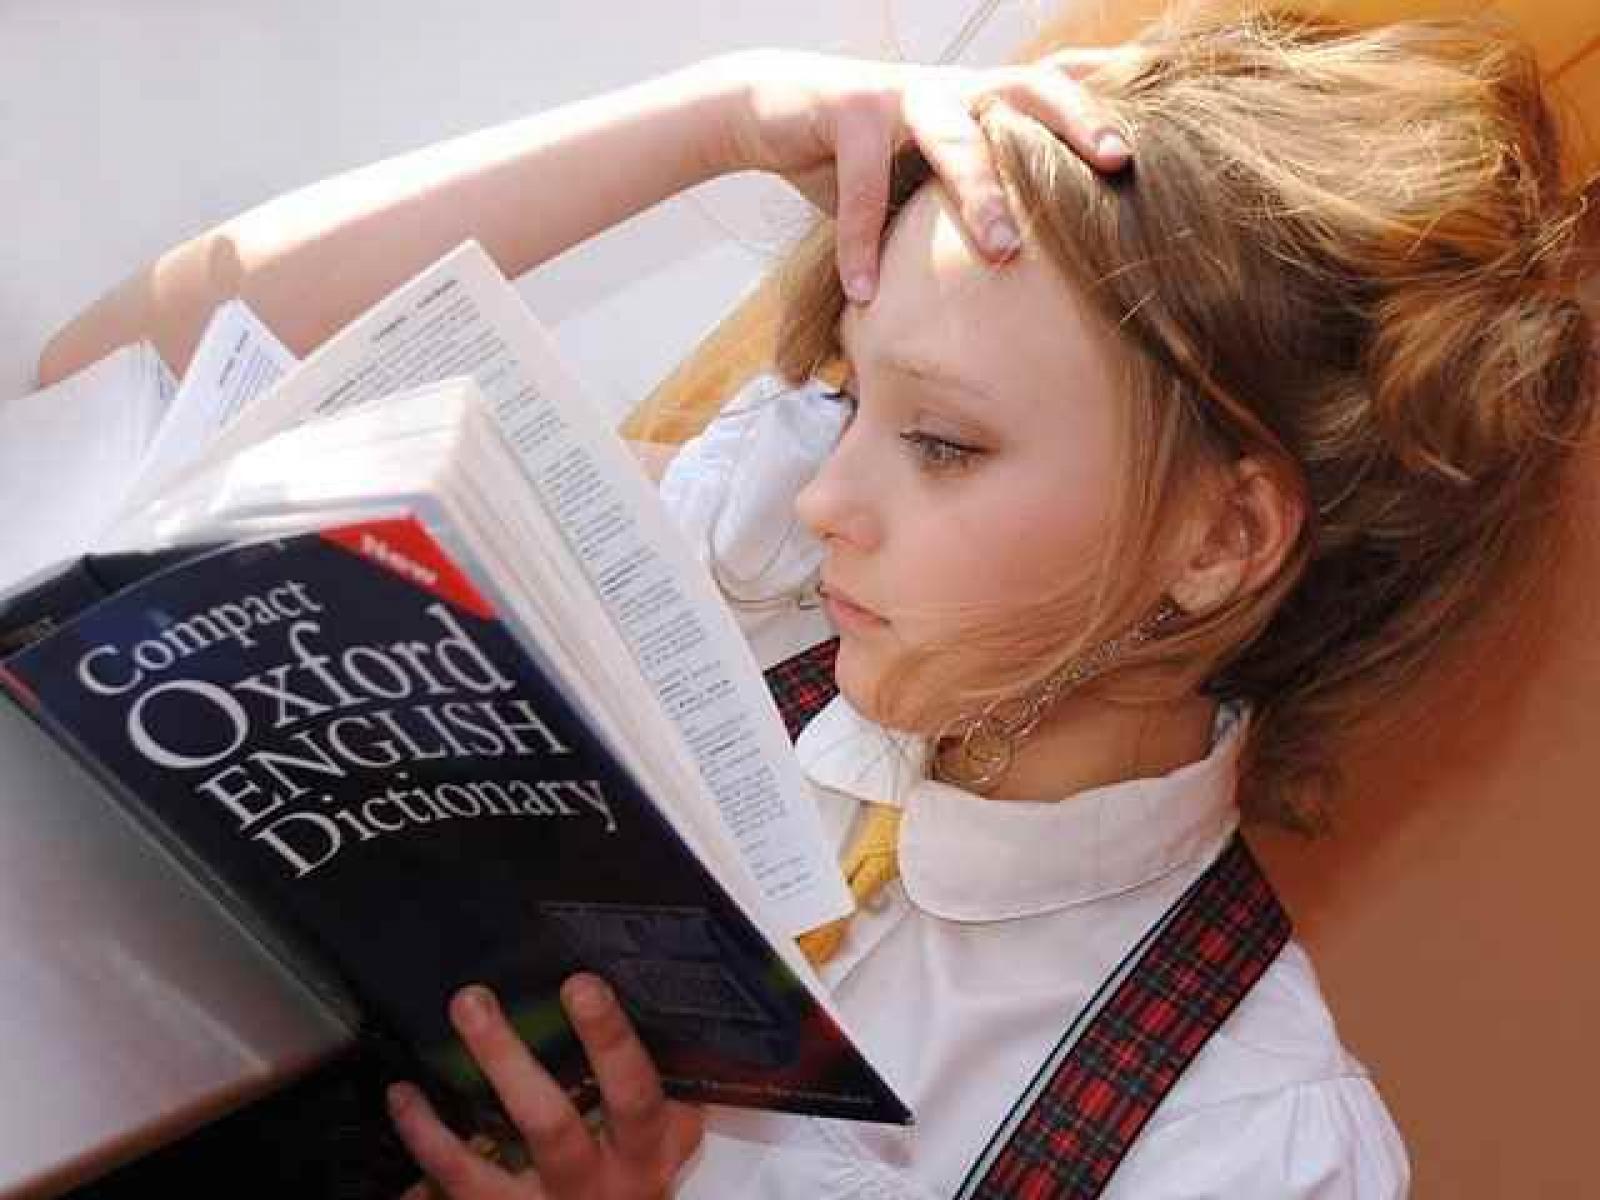 A girl reading an English dictionary